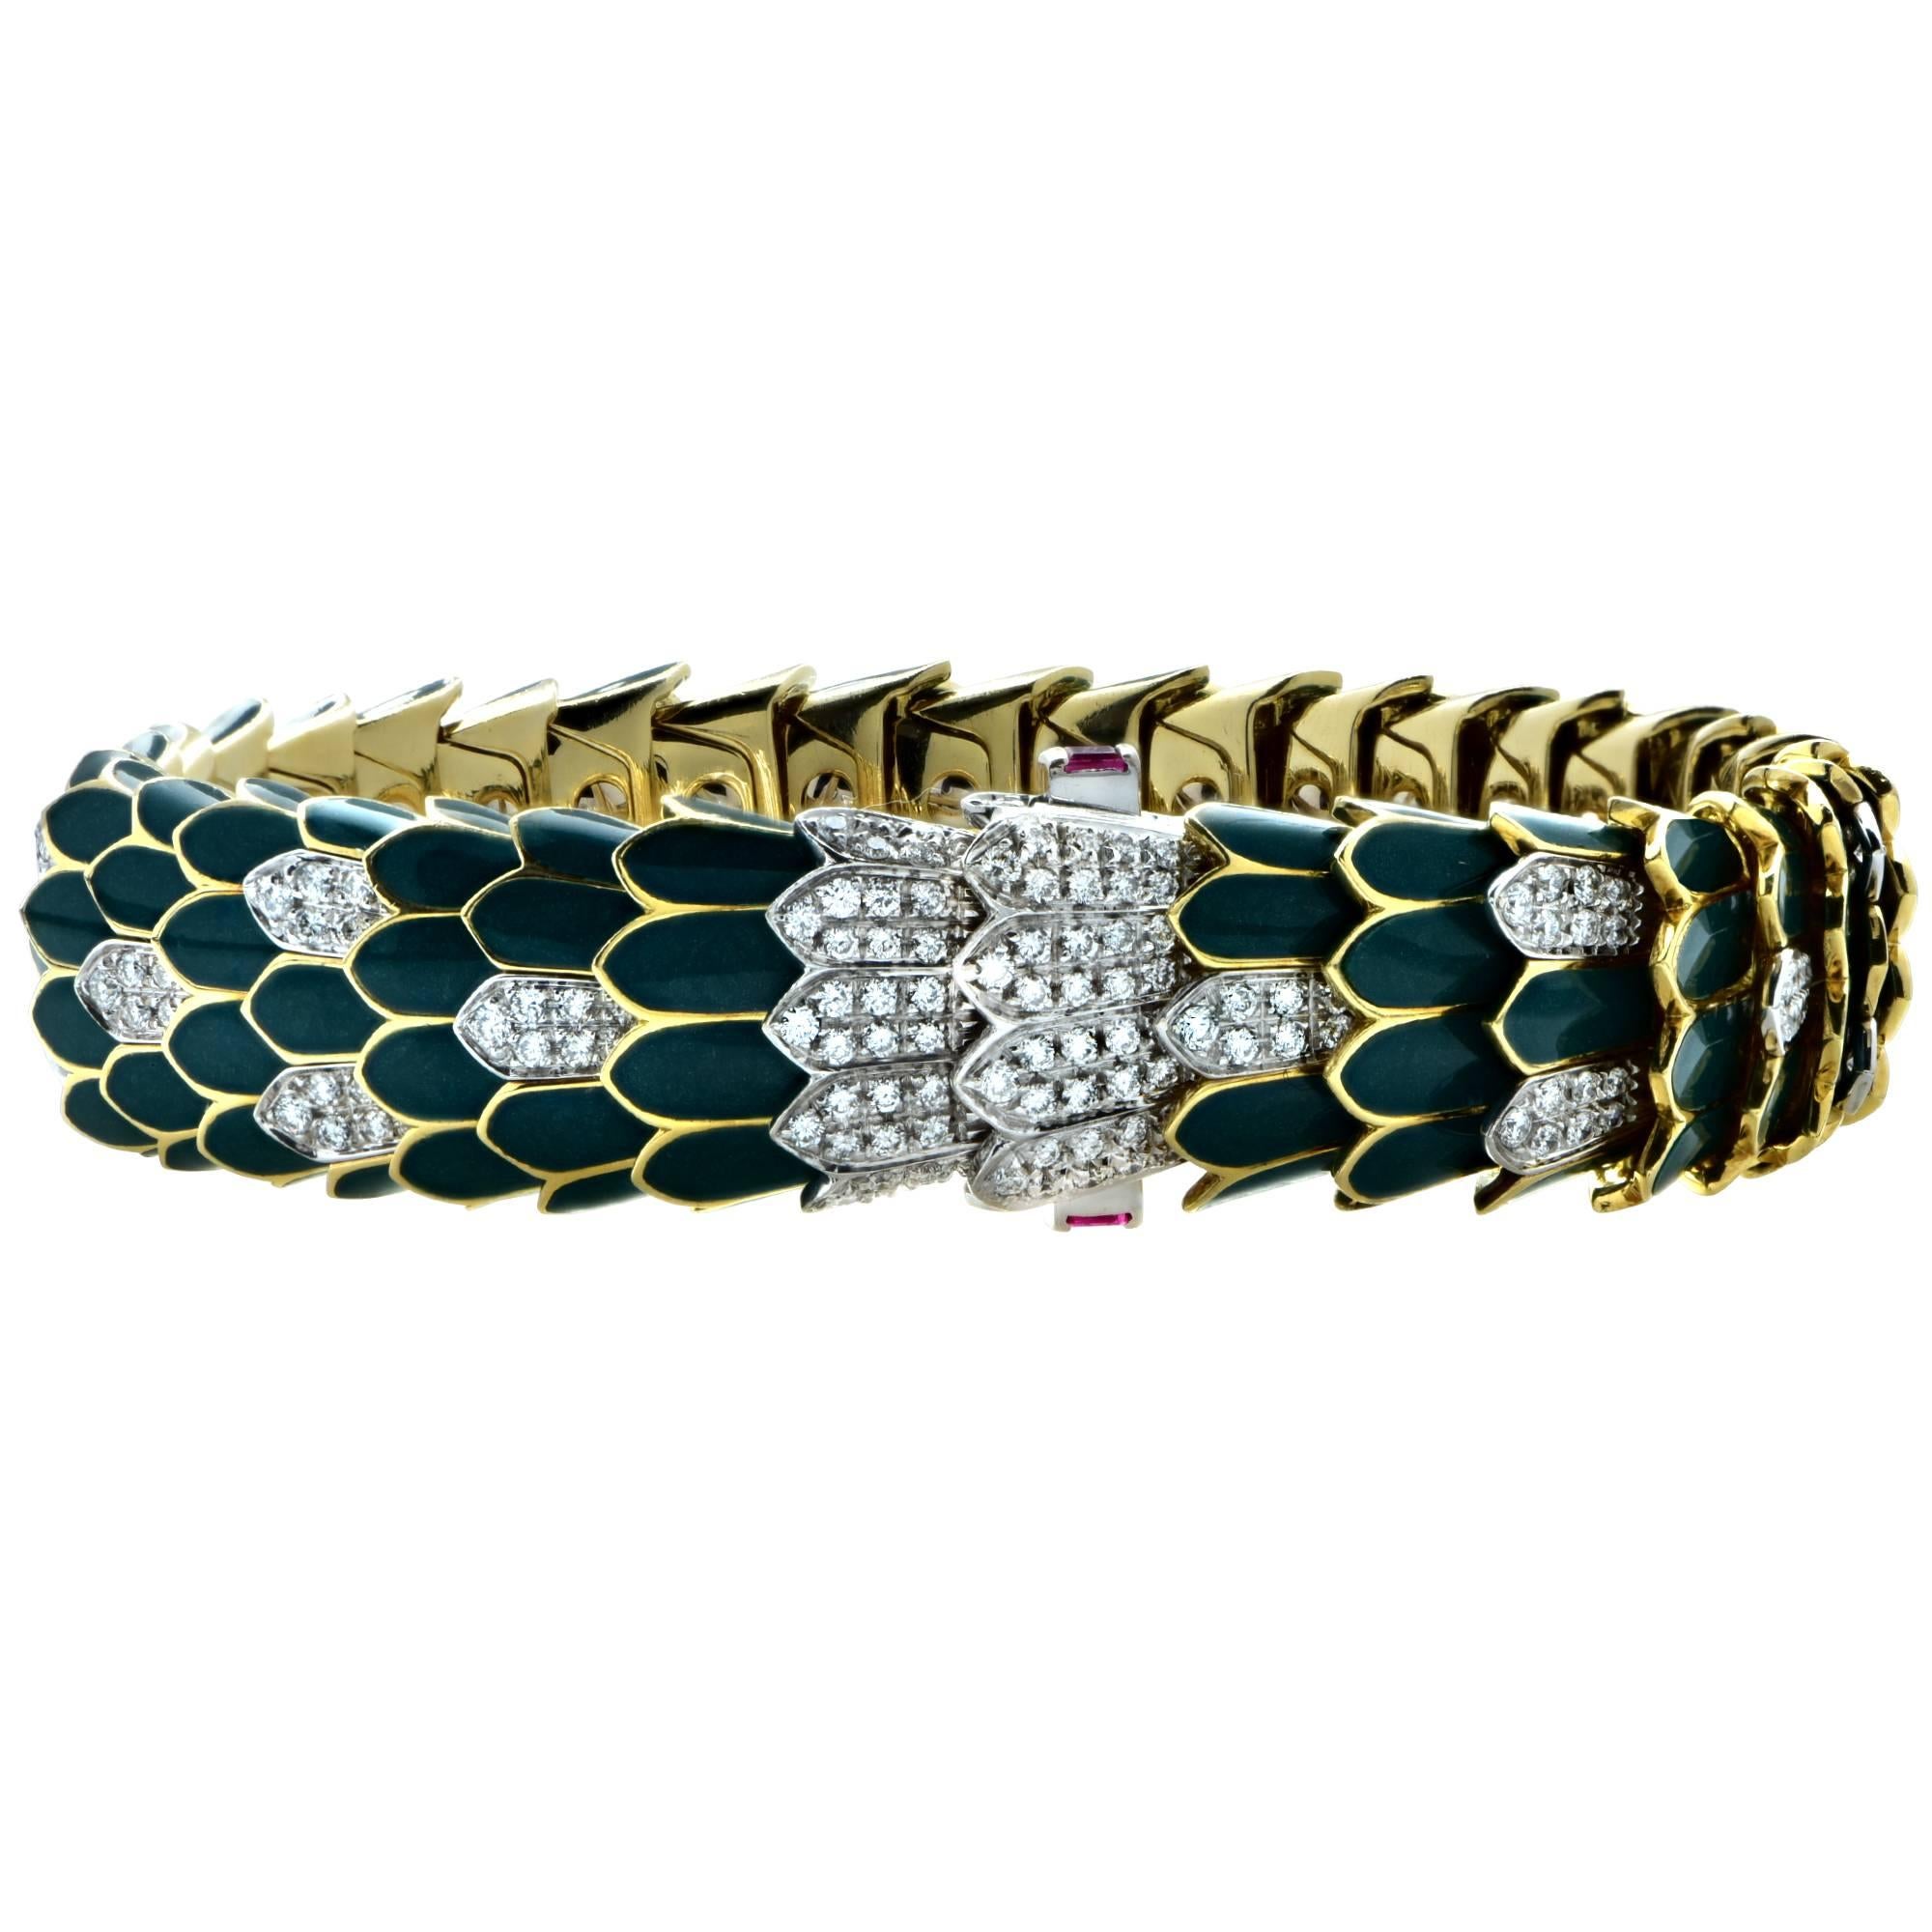 Sensational Roberto Coin Green Enamel Diamond 18k Yellow Gold Bracelet. Feast your senses on this superbly crafted bracelet. Italian fine jewelry at its finest. Gorgeous vivid green enamel scales set off against stunning white diamond encrusted